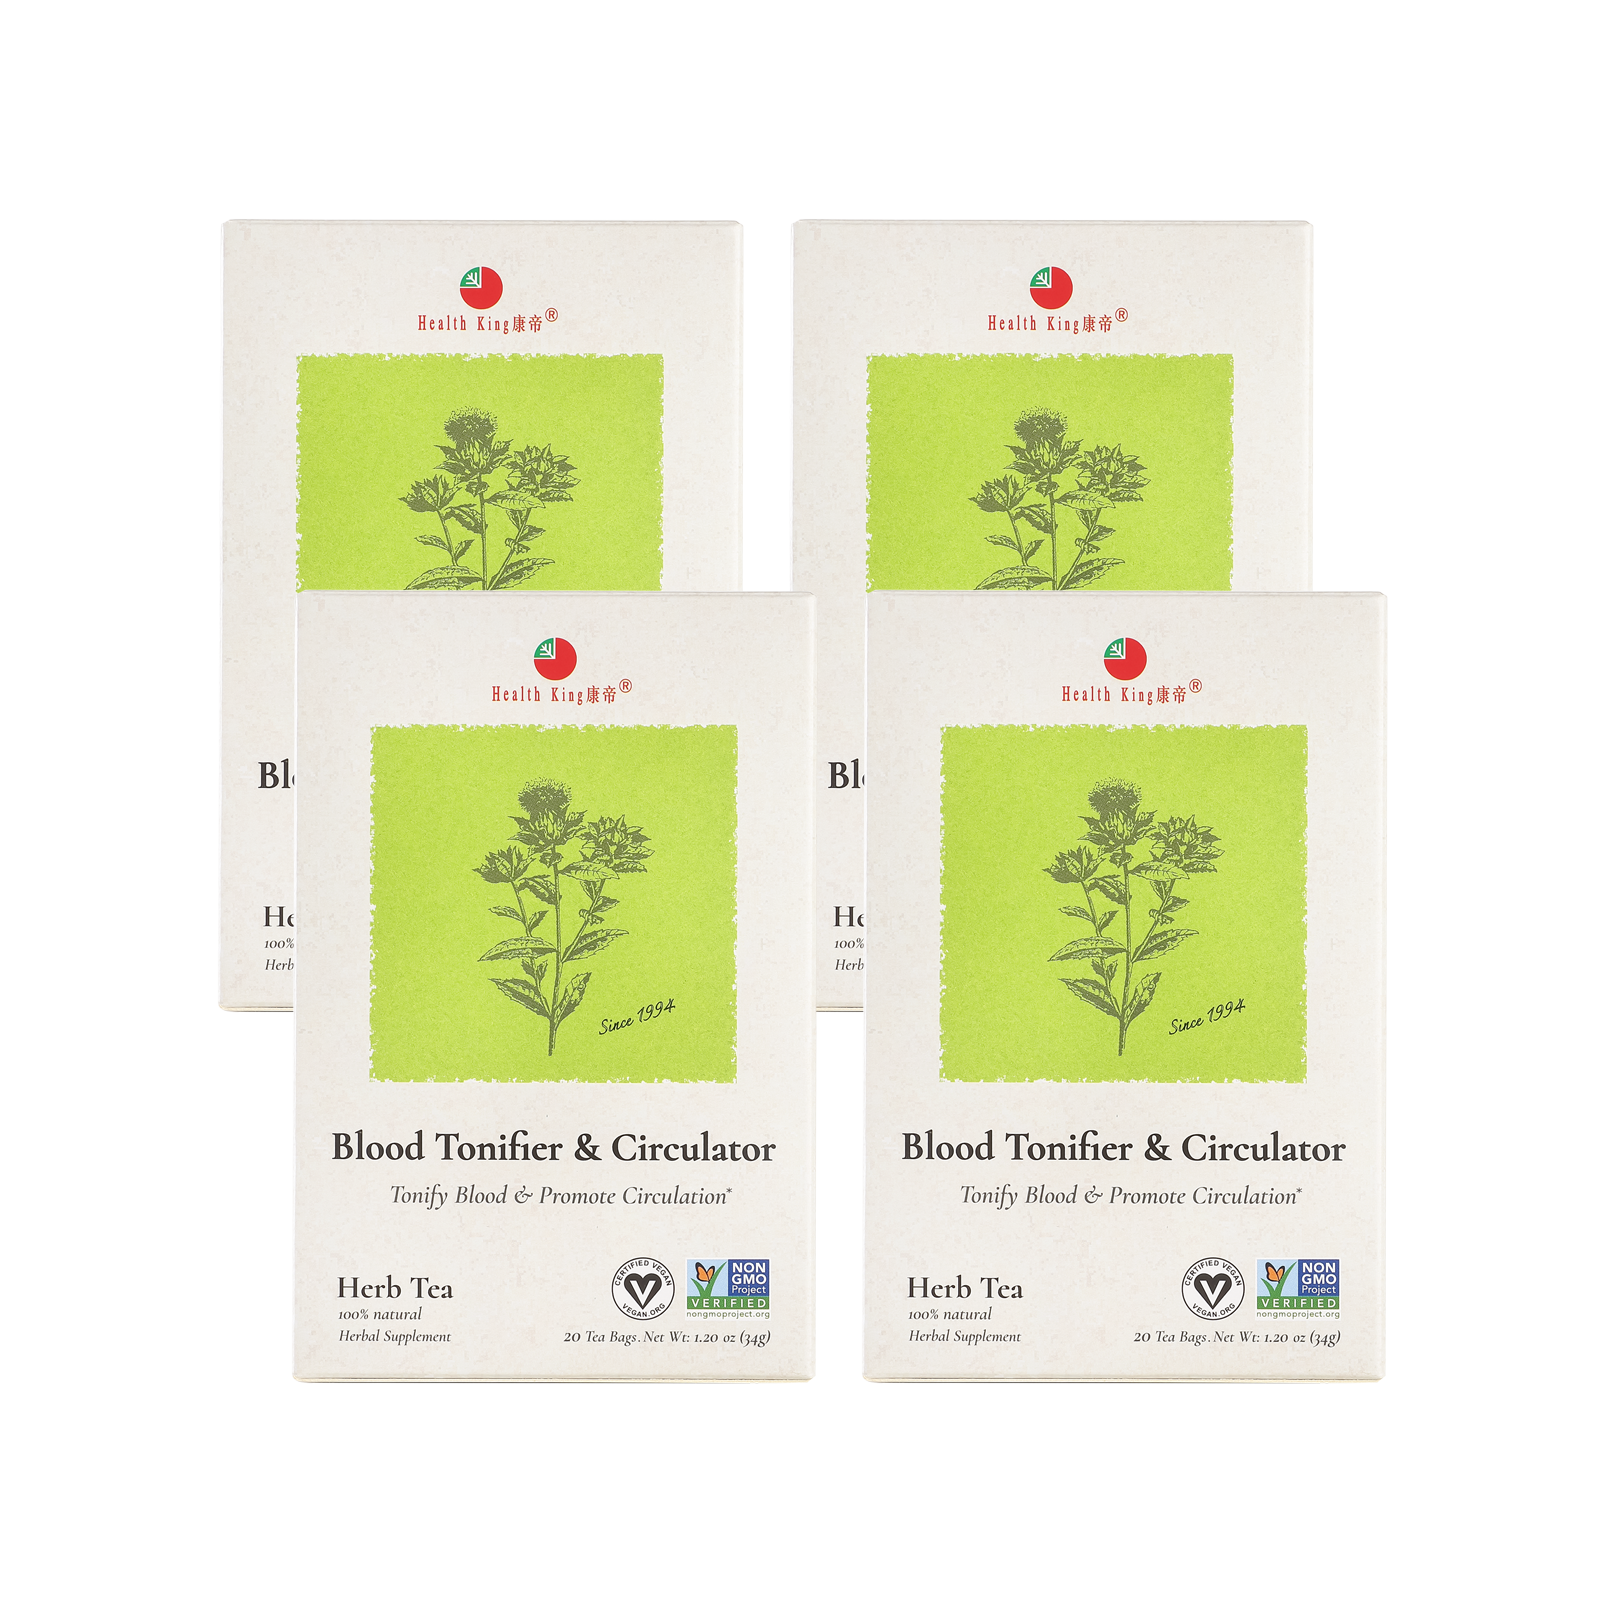 Four of herbal tea packets with a decorative leaf accent